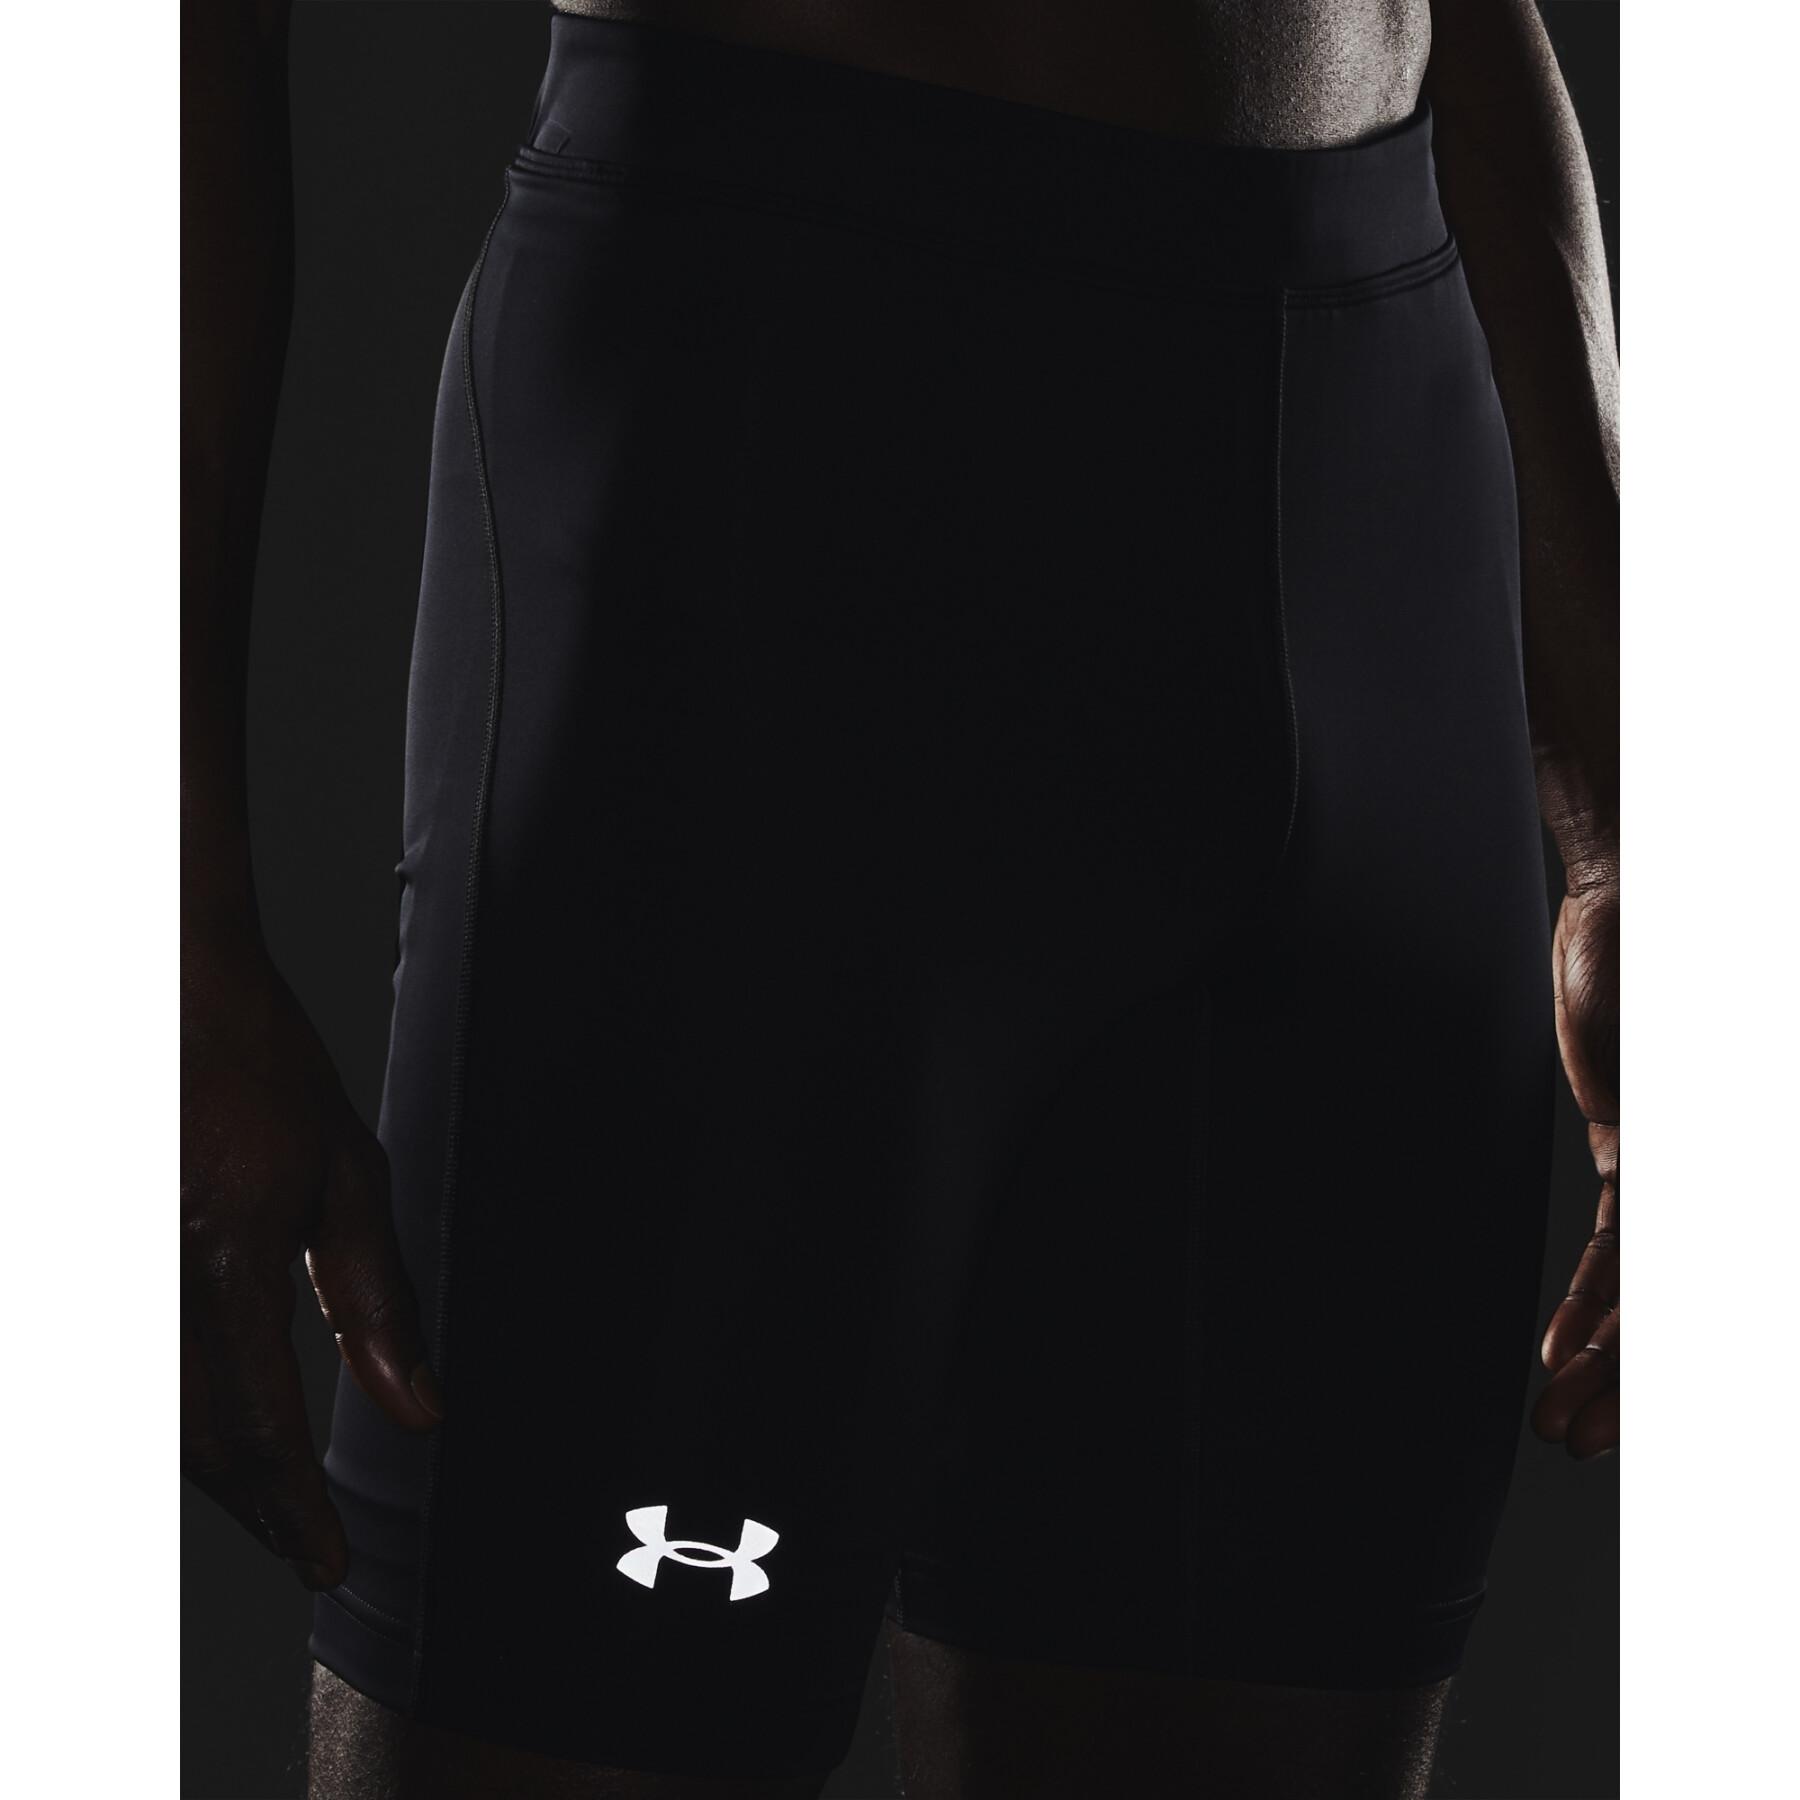 Legging 1/2 Under Armour Fly Fast